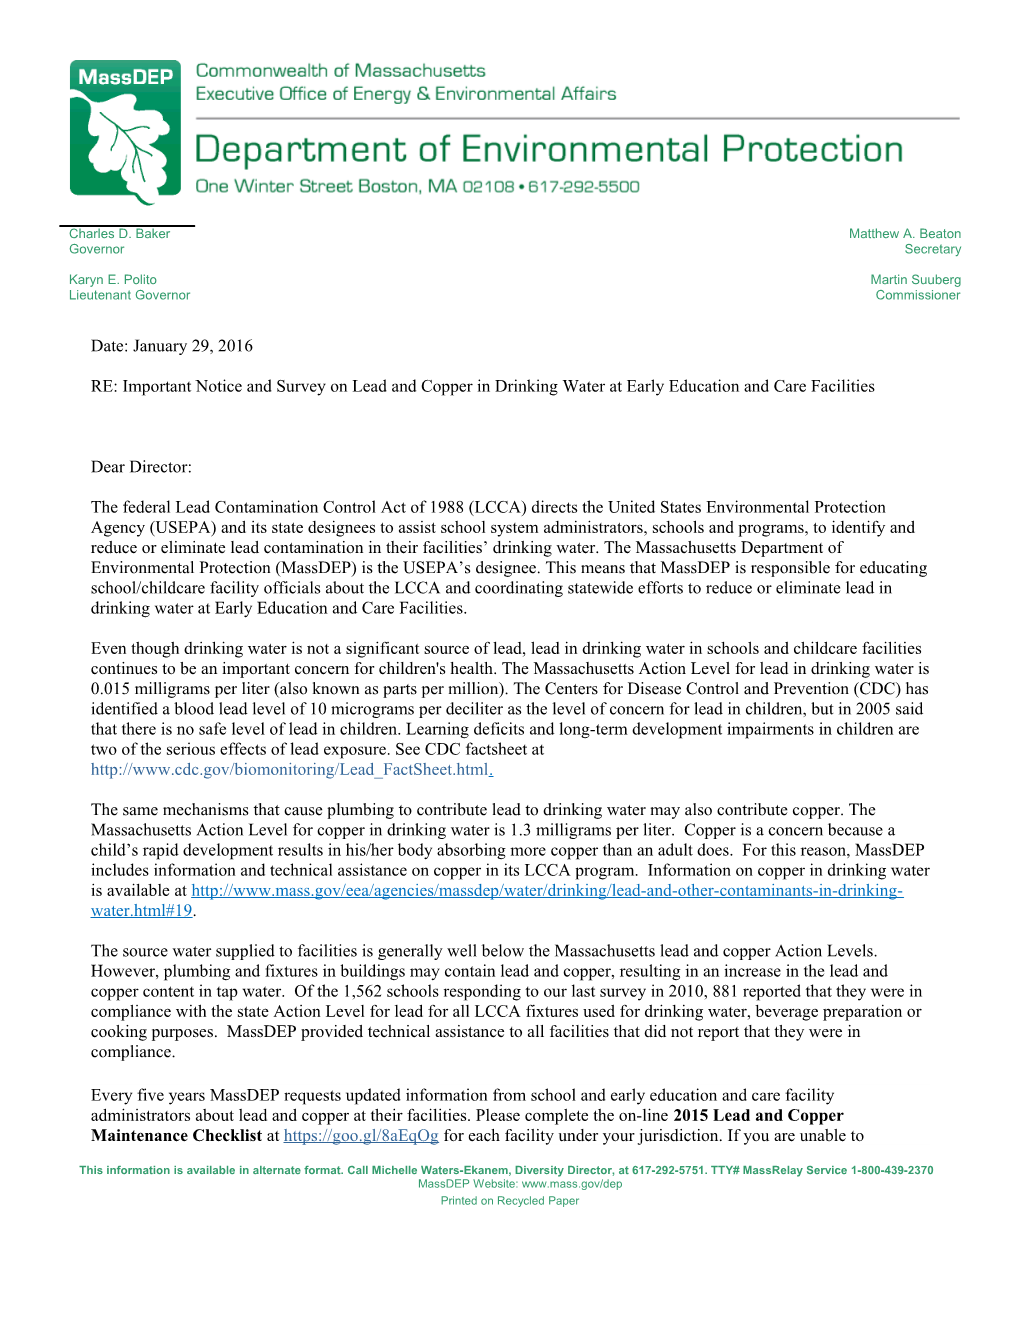 RE: Important Notice and Survey on Lead and Copper in Drinking Water at Early Education